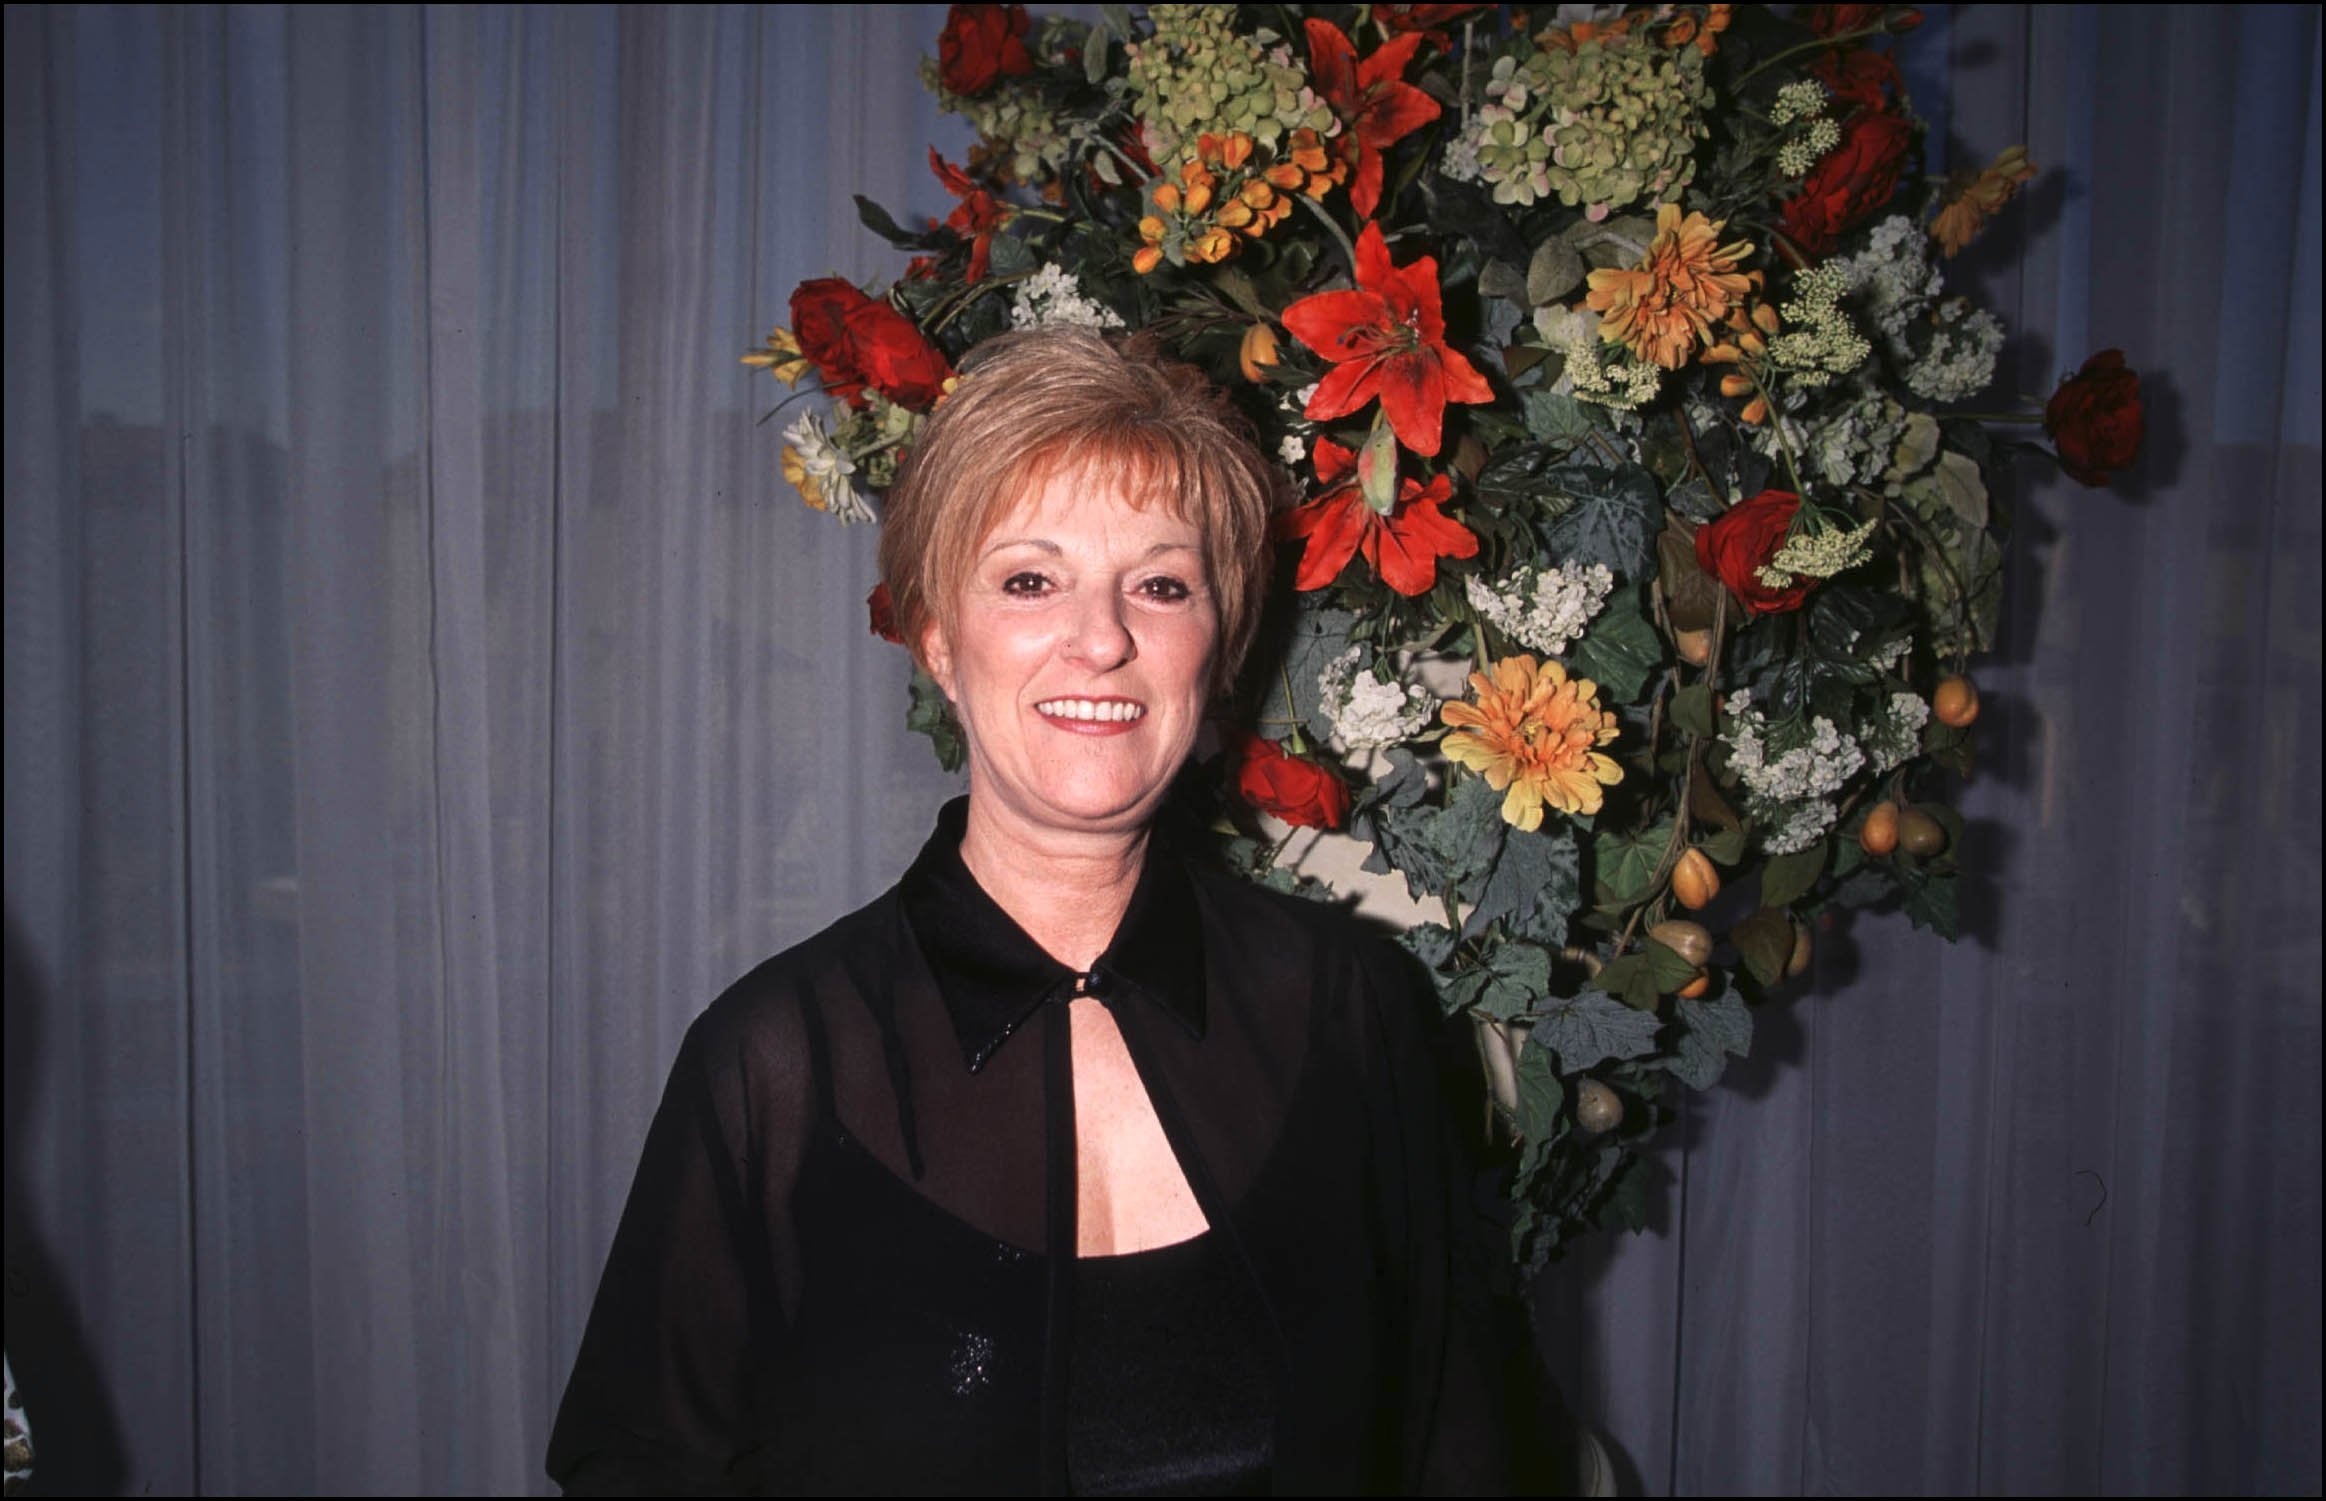 Claudette Dion at "Maman Dion's" Achille-Tangauy foundation dinner in Canada on May 14, 2001. | Source: Getty Images